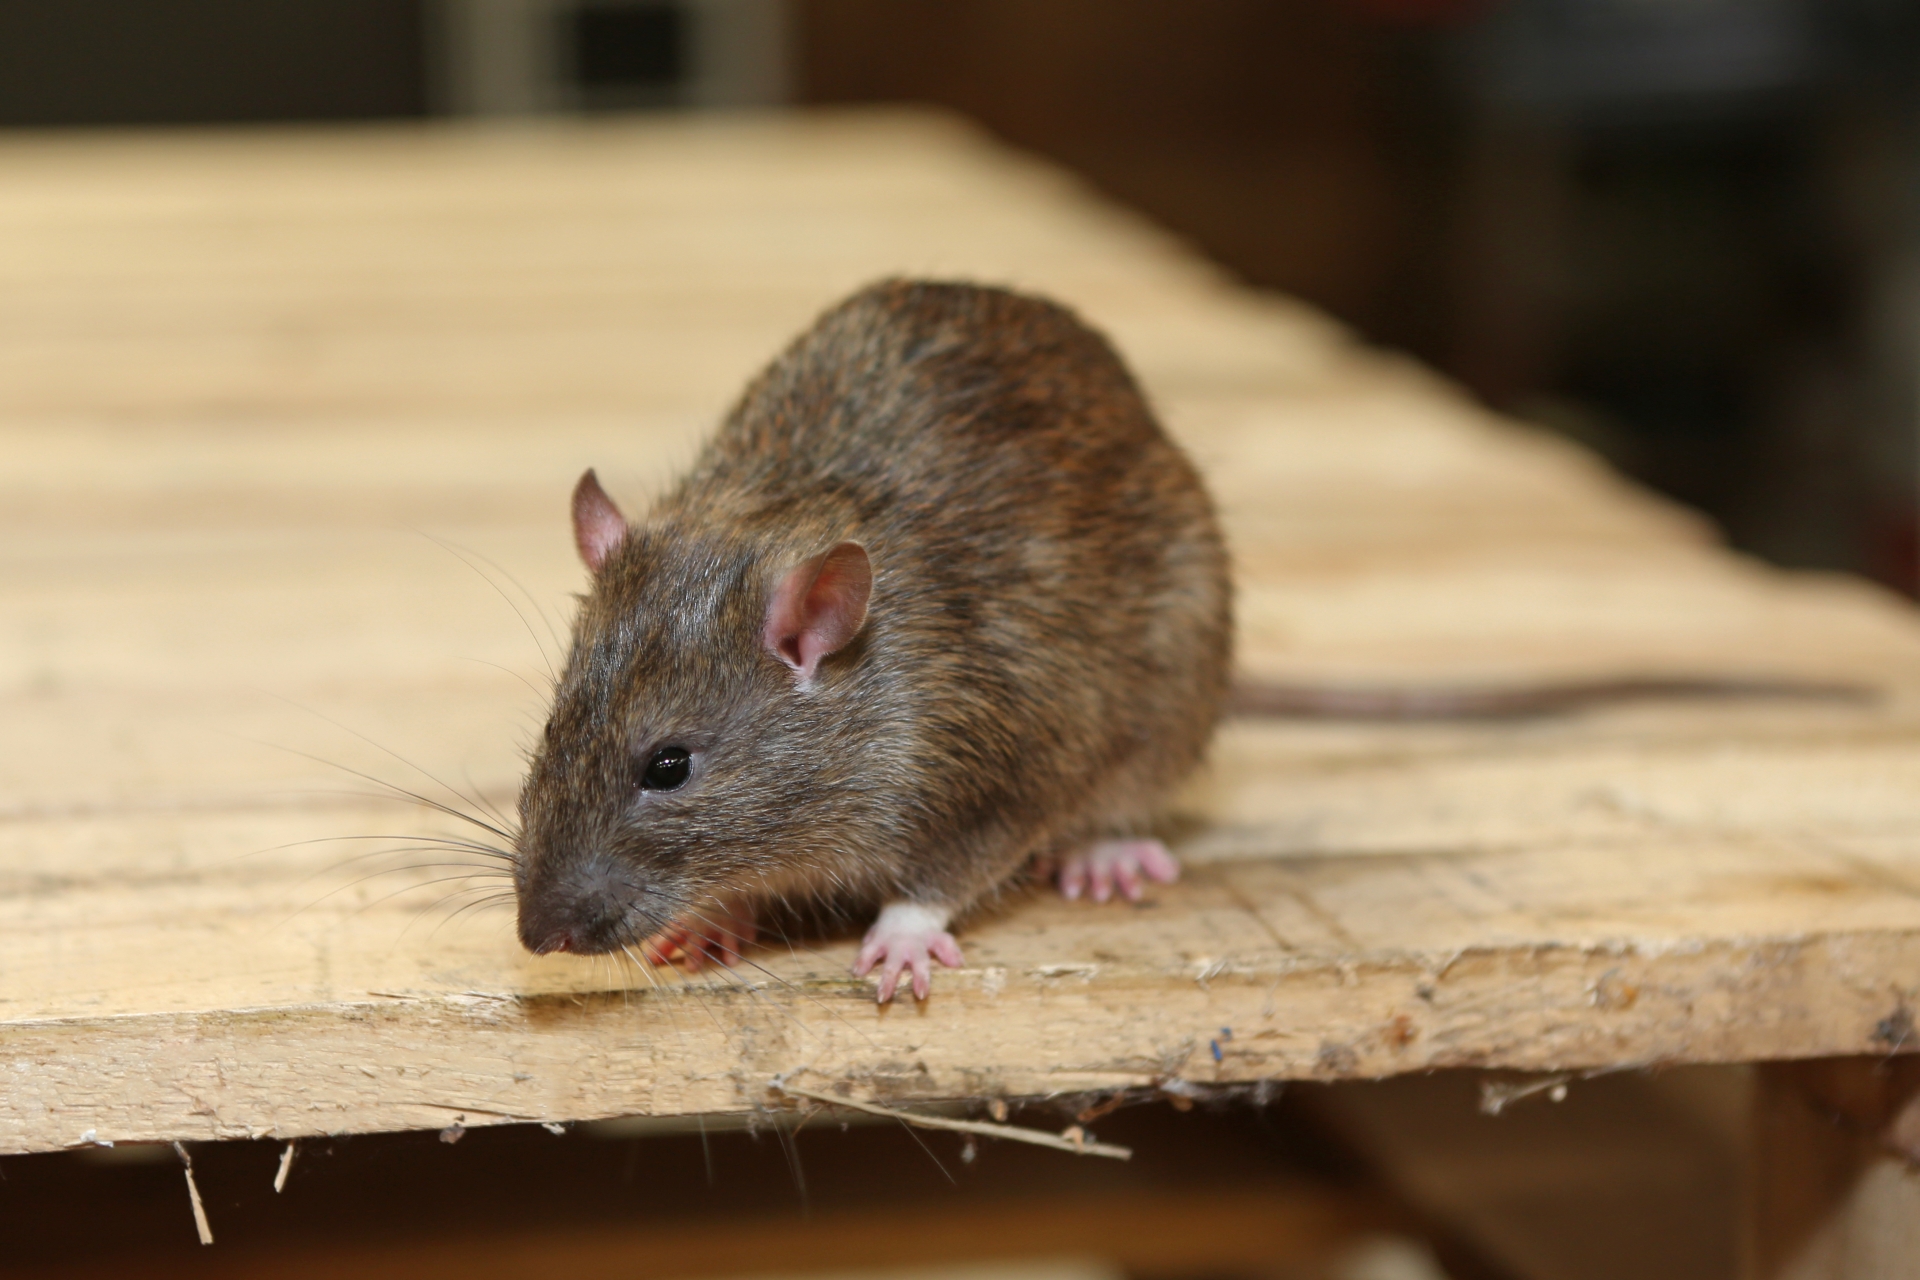 Rat extermination, Pest Control in Norwood Green, UB2. Call Now 020 8166 9746